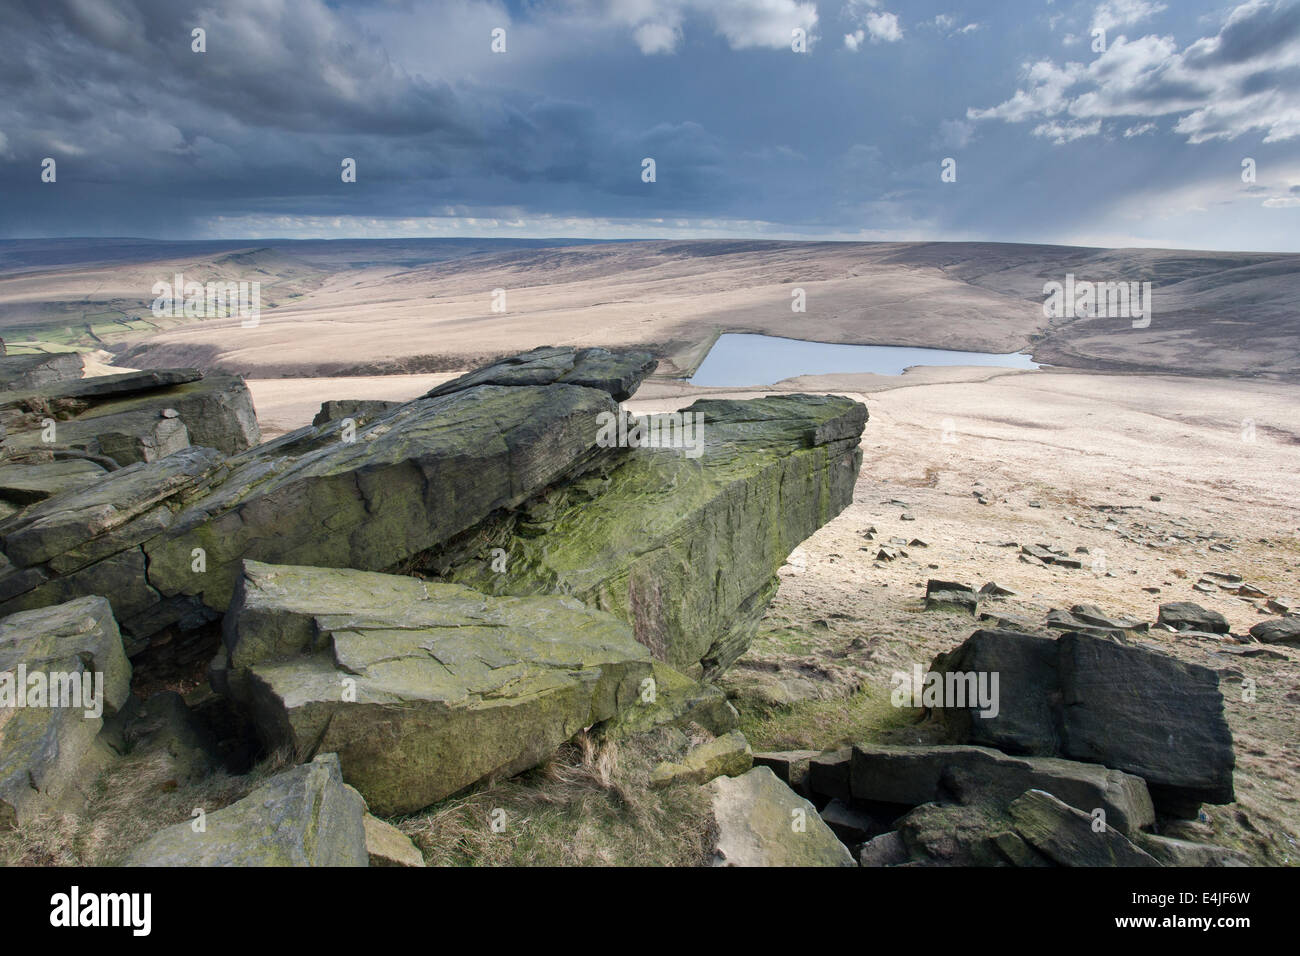 Storm clouds over March Haigh reservoir seen from The Buckstones, Marsden Moor, South Pennines, West Yorkshire, UK Stock Photo